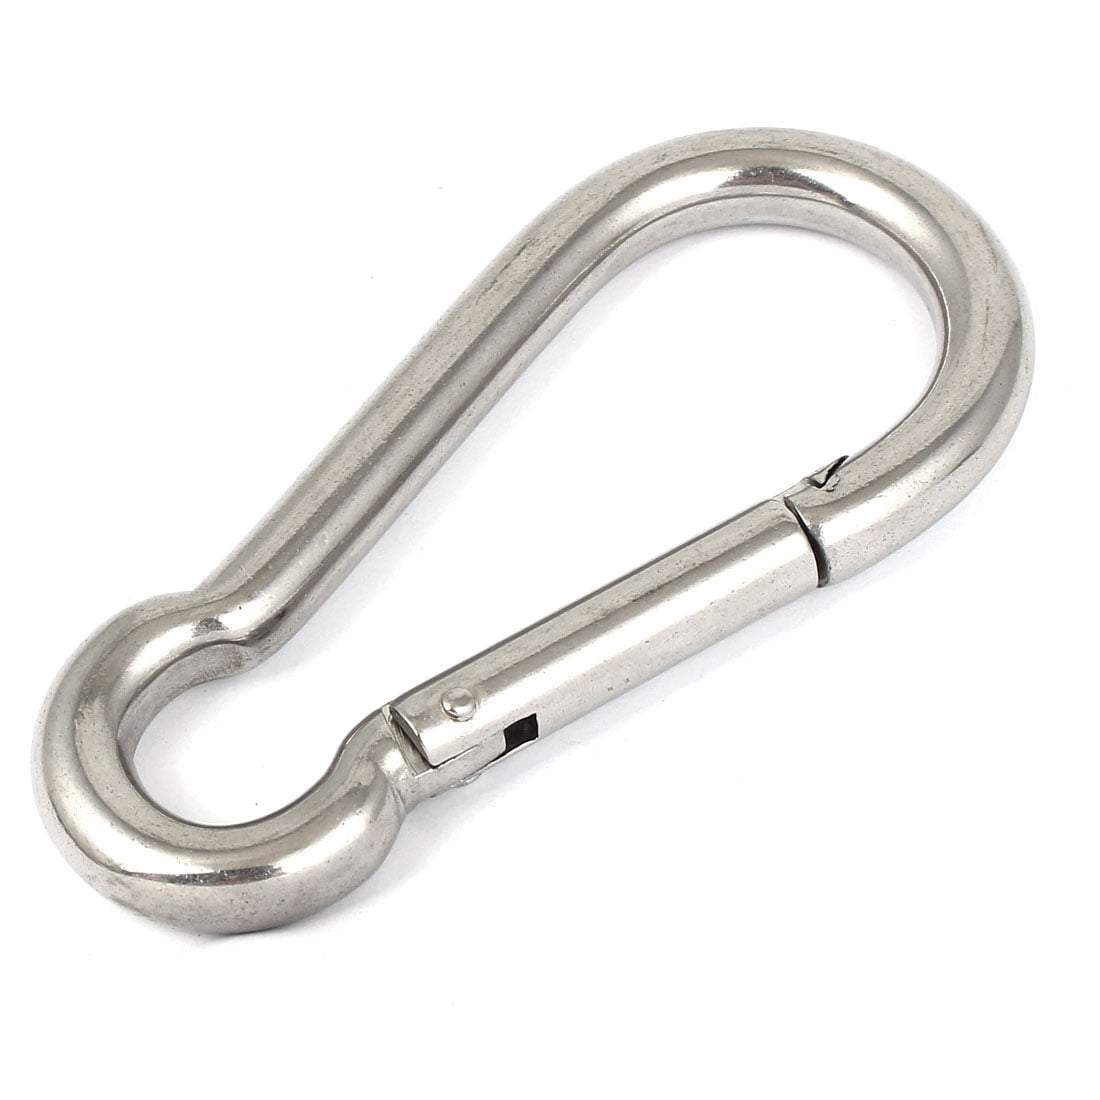 LARGE 11mm THICK CARABINER Spring Loaded Camping Snap Clip Hook Clasp Carabina 